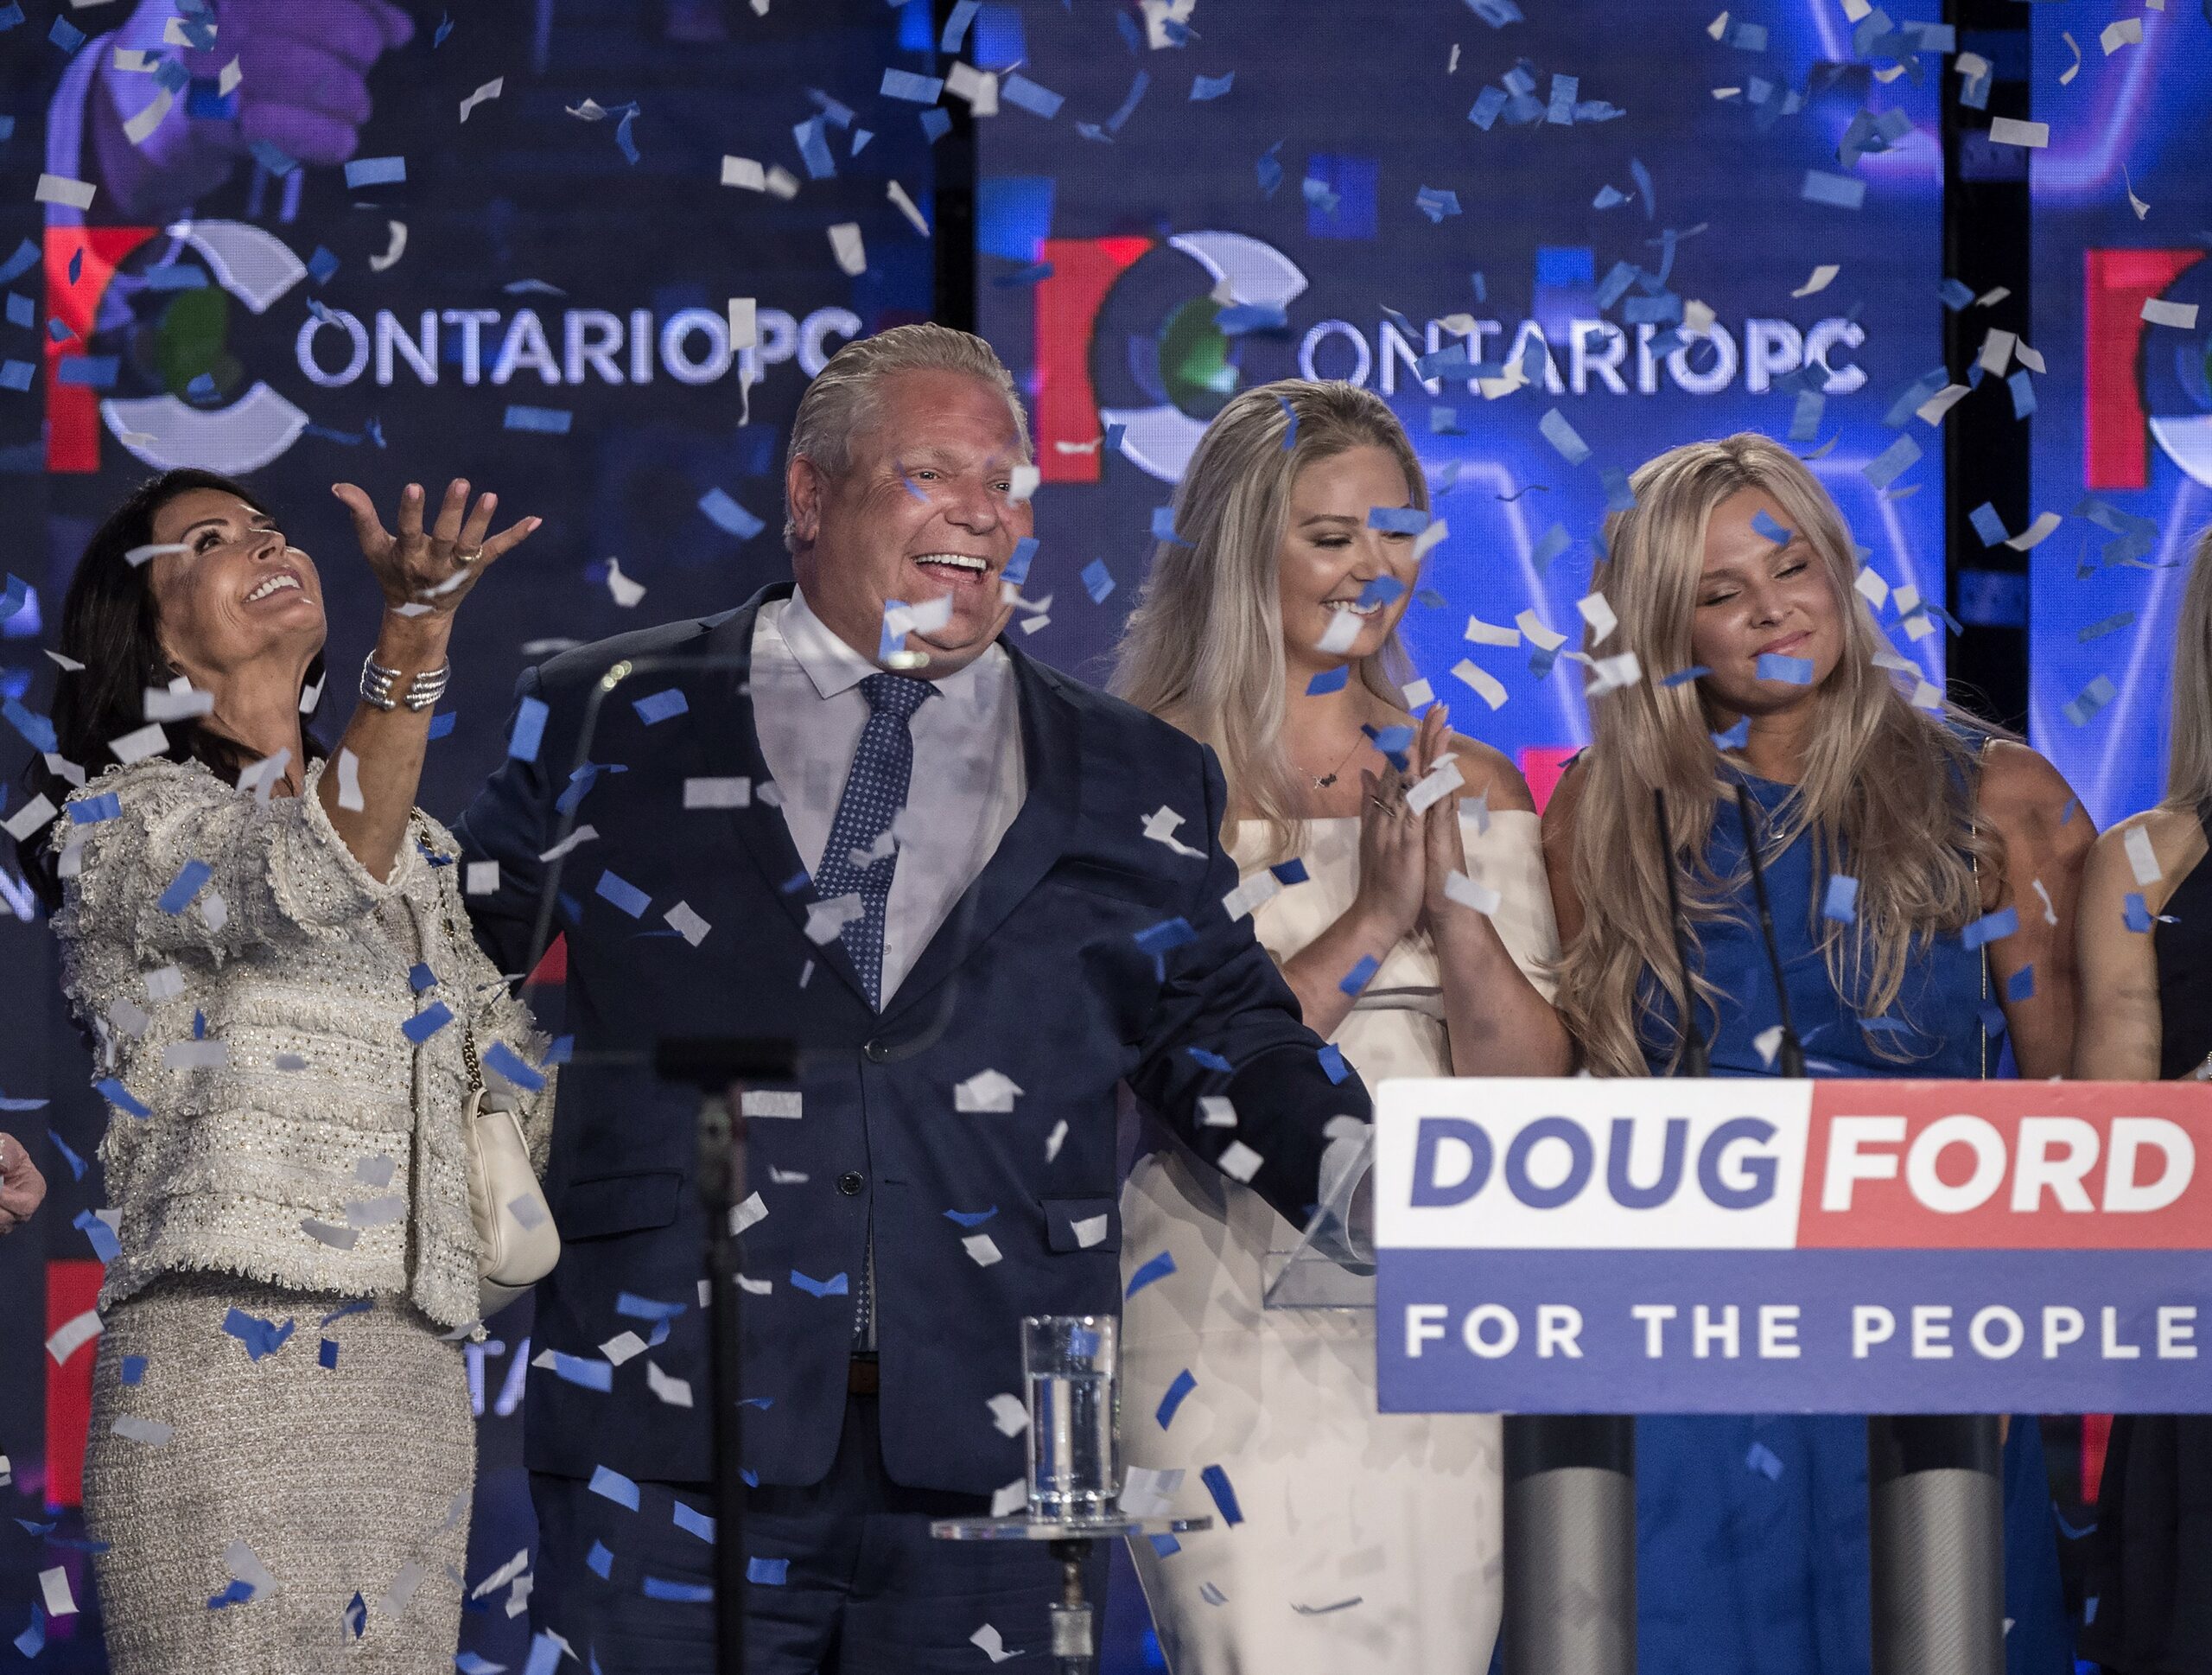 Health-care and social services advocates brace for another Ford victory